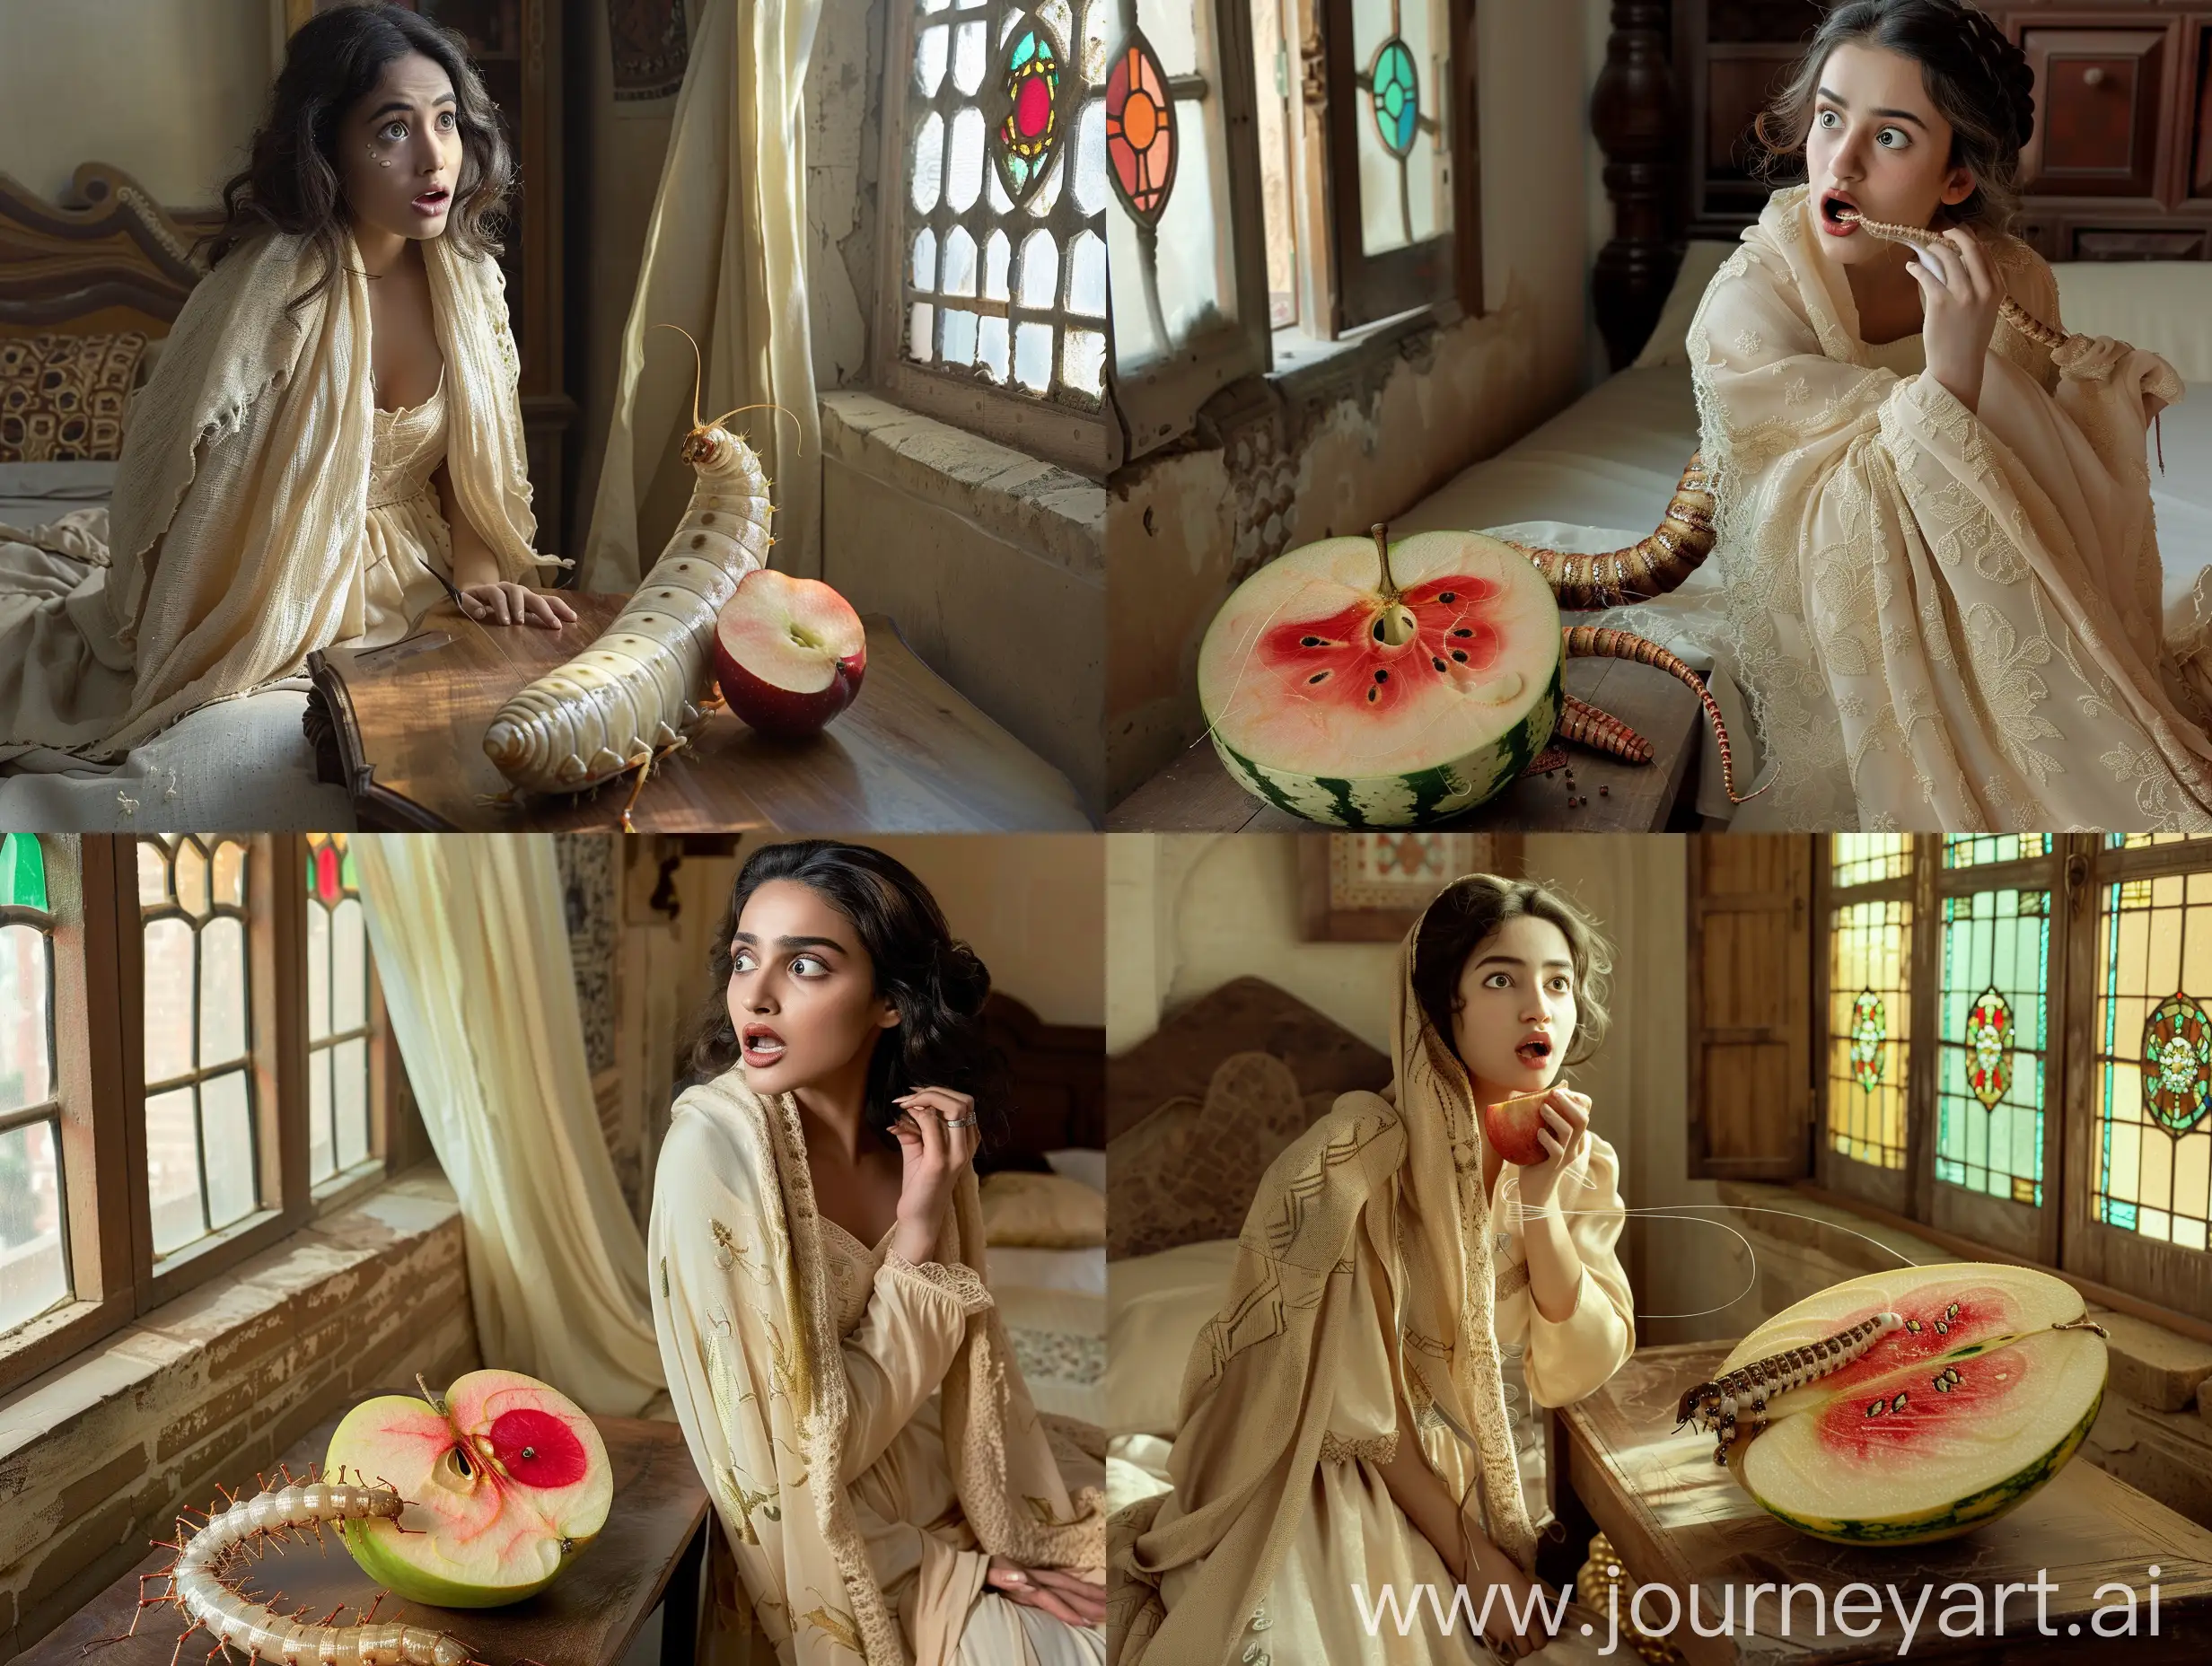 Persian-Woman-Surprised-by-Giant-Silkworm-Eating-Oversized-Apple-in-Bam-Citadel-Room